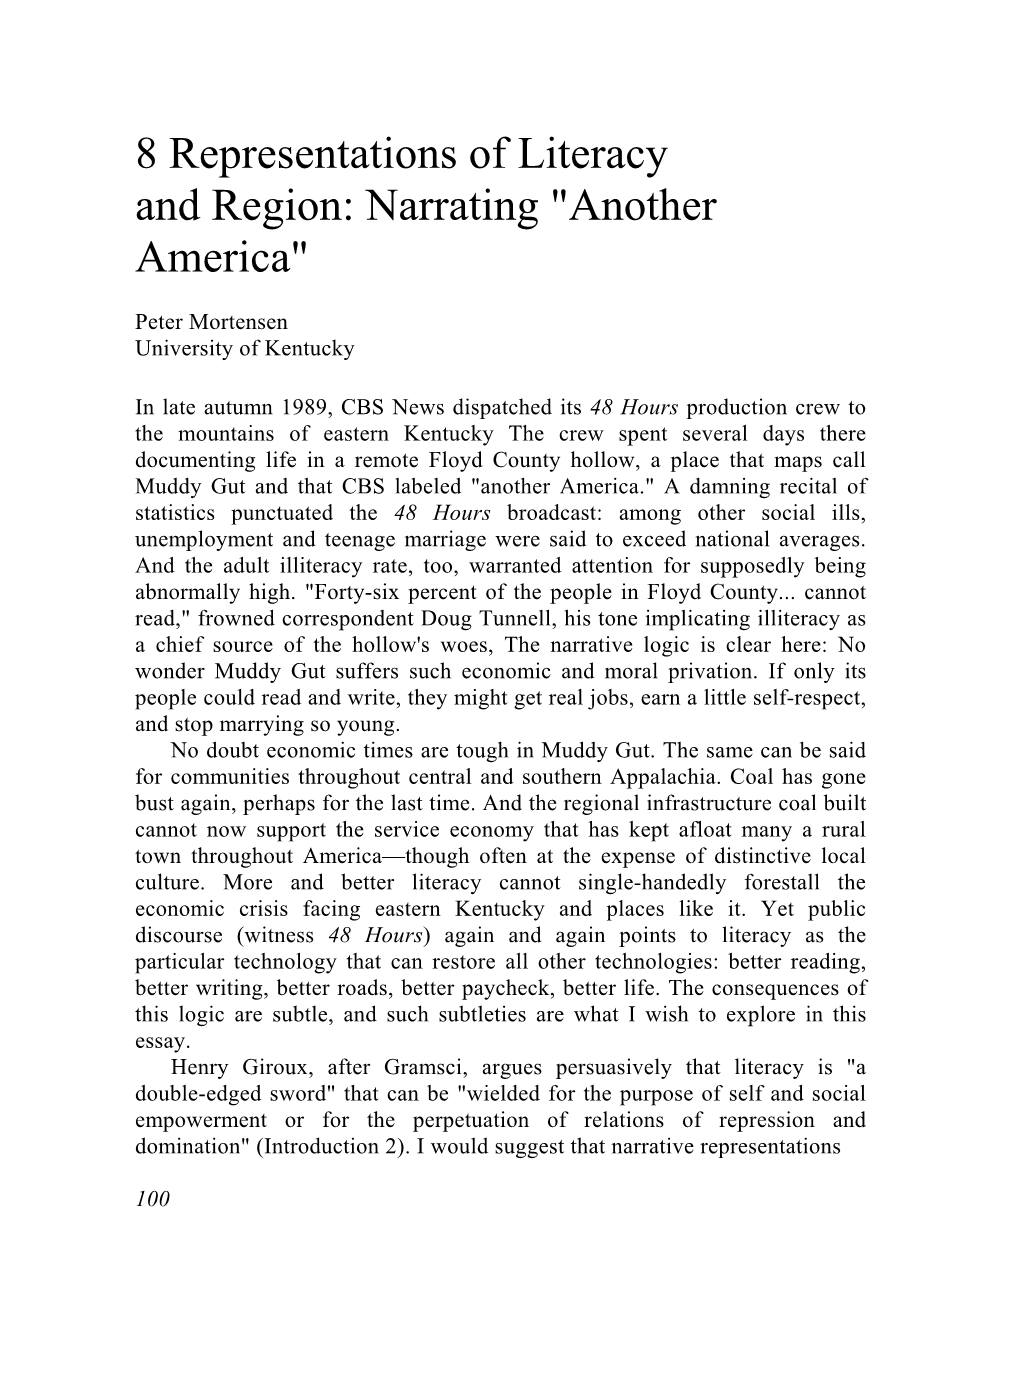 8 Representations of Literacy and Region: Narrating "Another America"